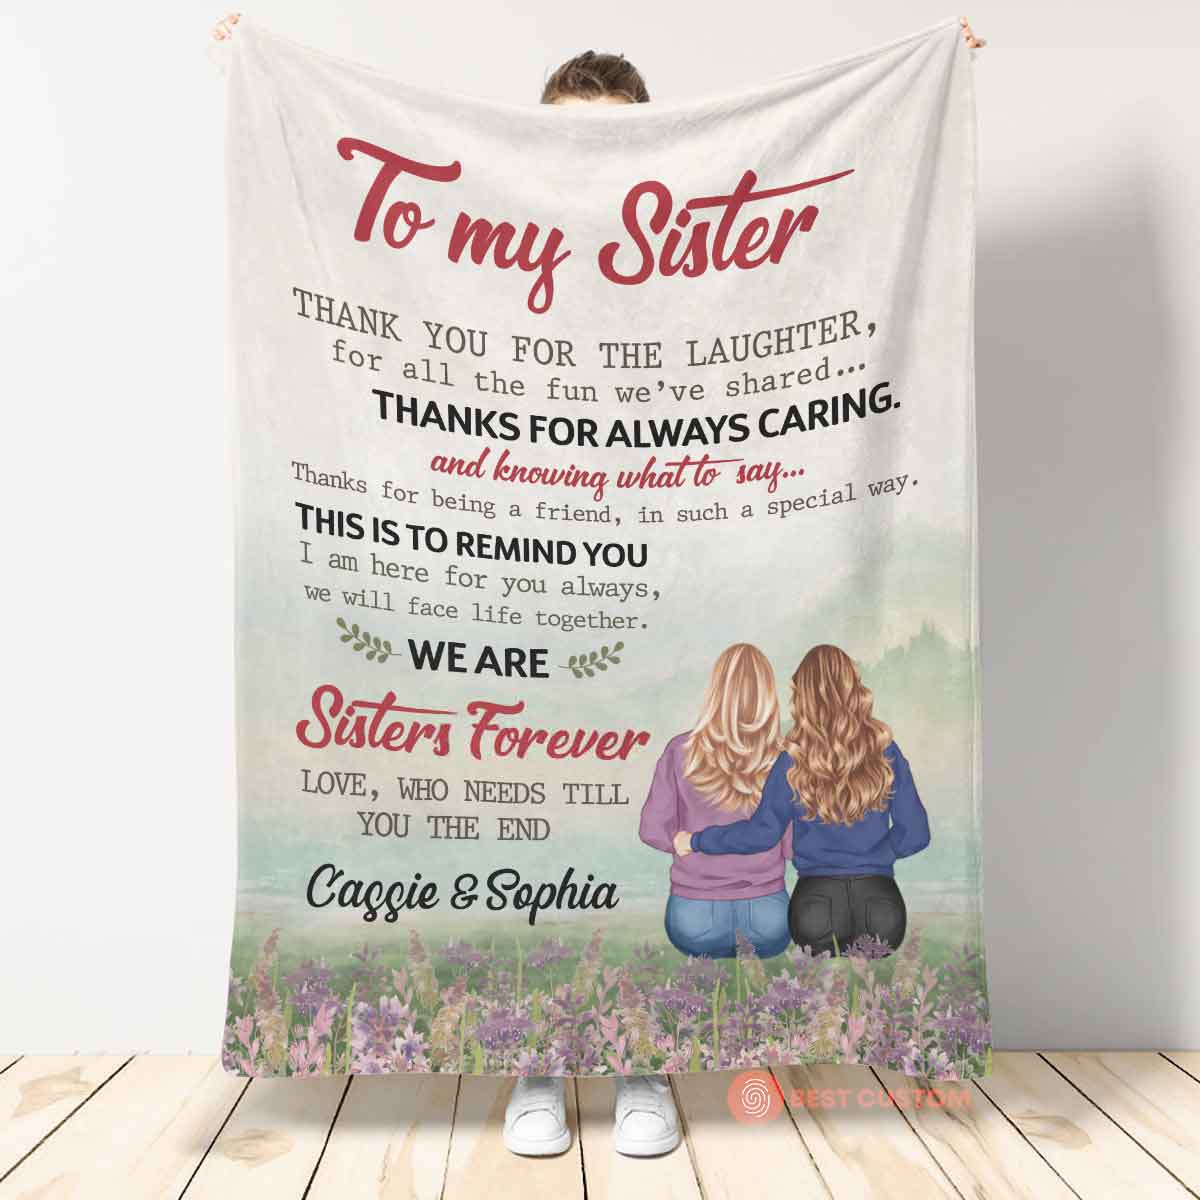 I Am Here For You - Personalized Blanket - Birthday Gift For Sisters, Soul Sisters, Besties 6_62d6c076-35d3-4df7-85d6-7efa206b4fec.jpg?v=1677481349